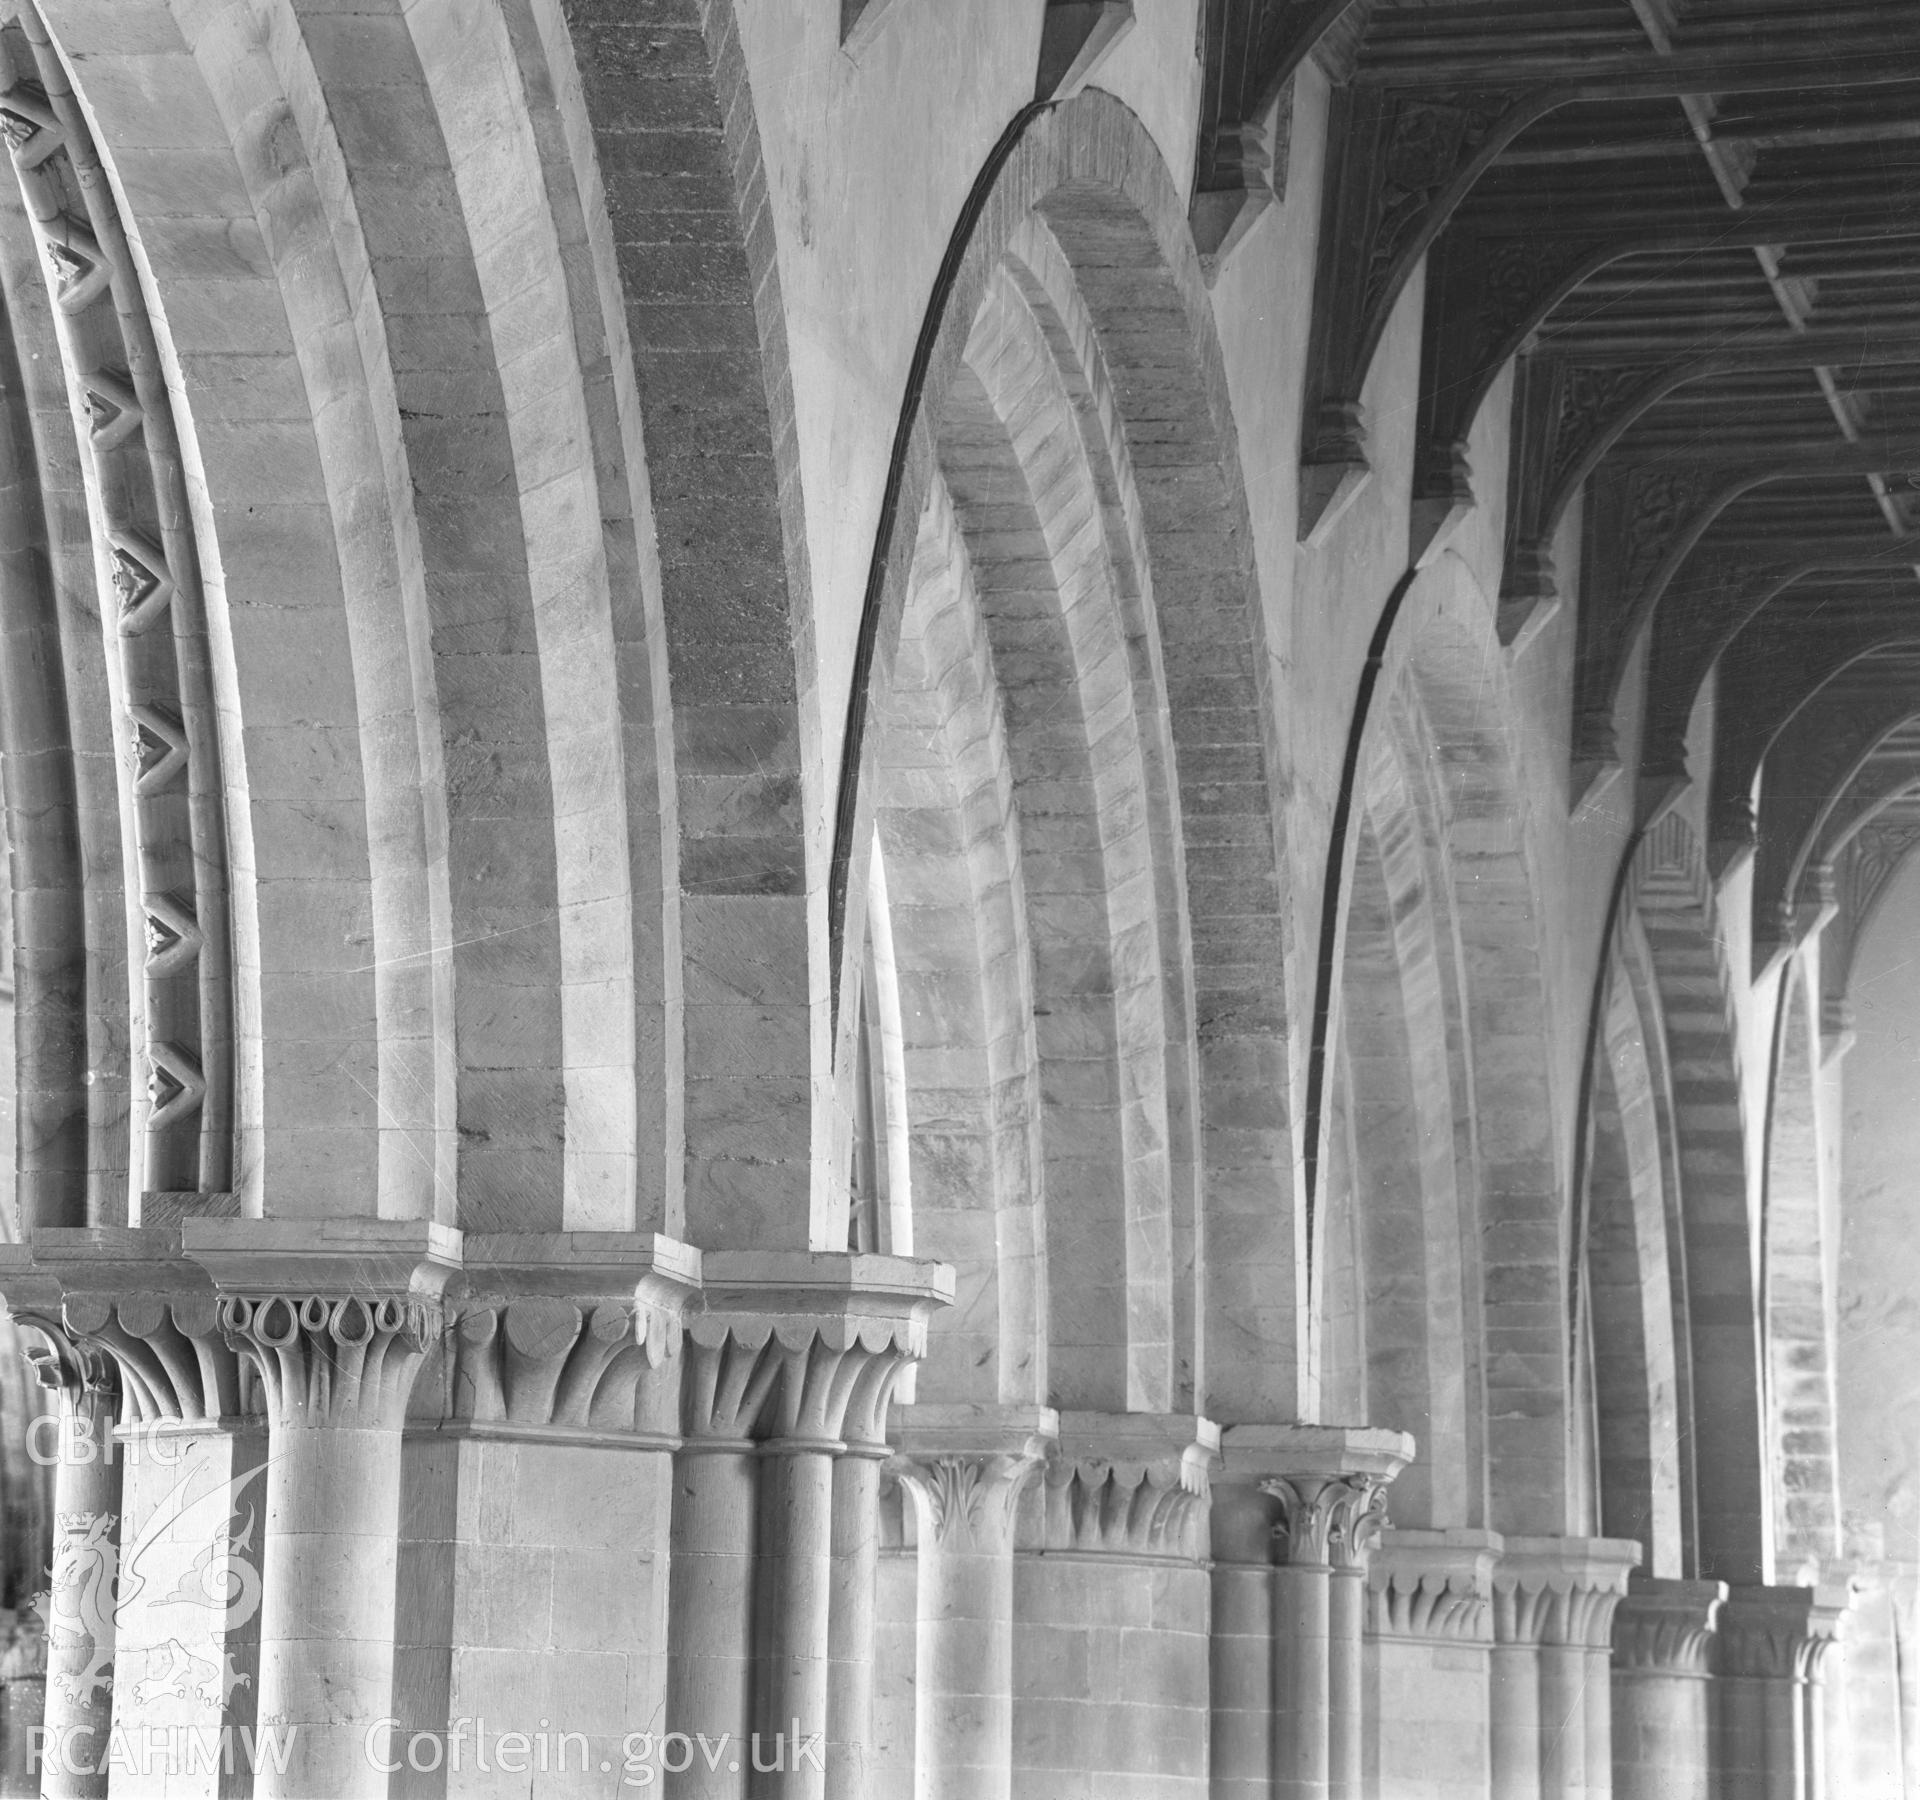 Digital copy of a black and white acetate negative showing clustered columns in St. David's Cathedral, taken by E.W. Lovegrove, July 1936.